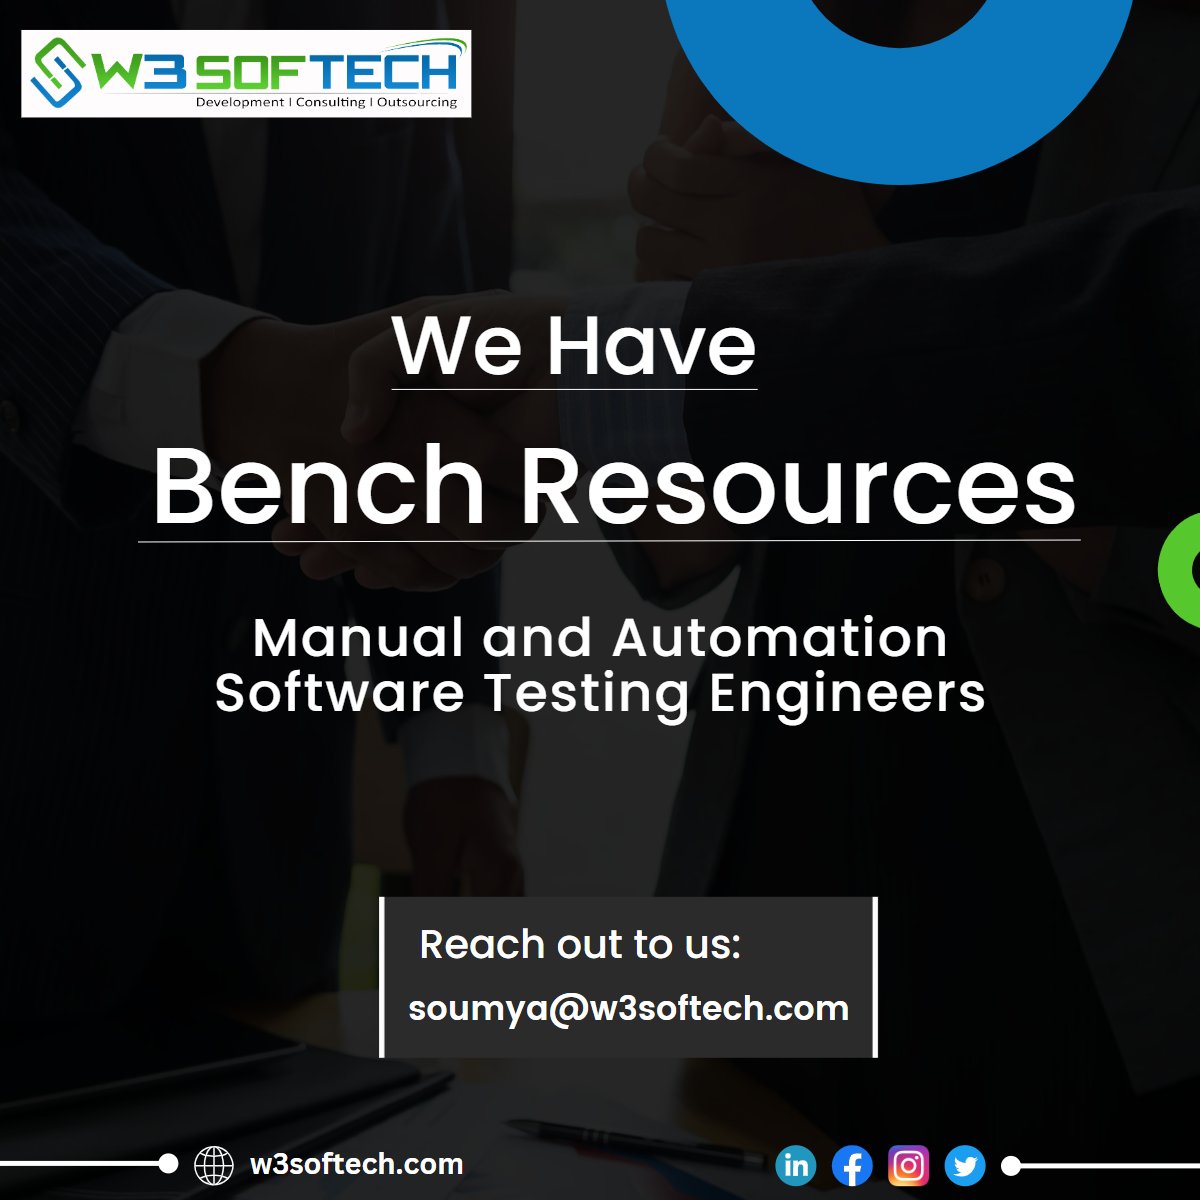 As a software testing company, we understand the importance of having a reliable team of manual and automation software testing engineers. We have bench resources available for your organization's needs. Contact us for more info: Email: soumya@w3softech.com #testing #IT